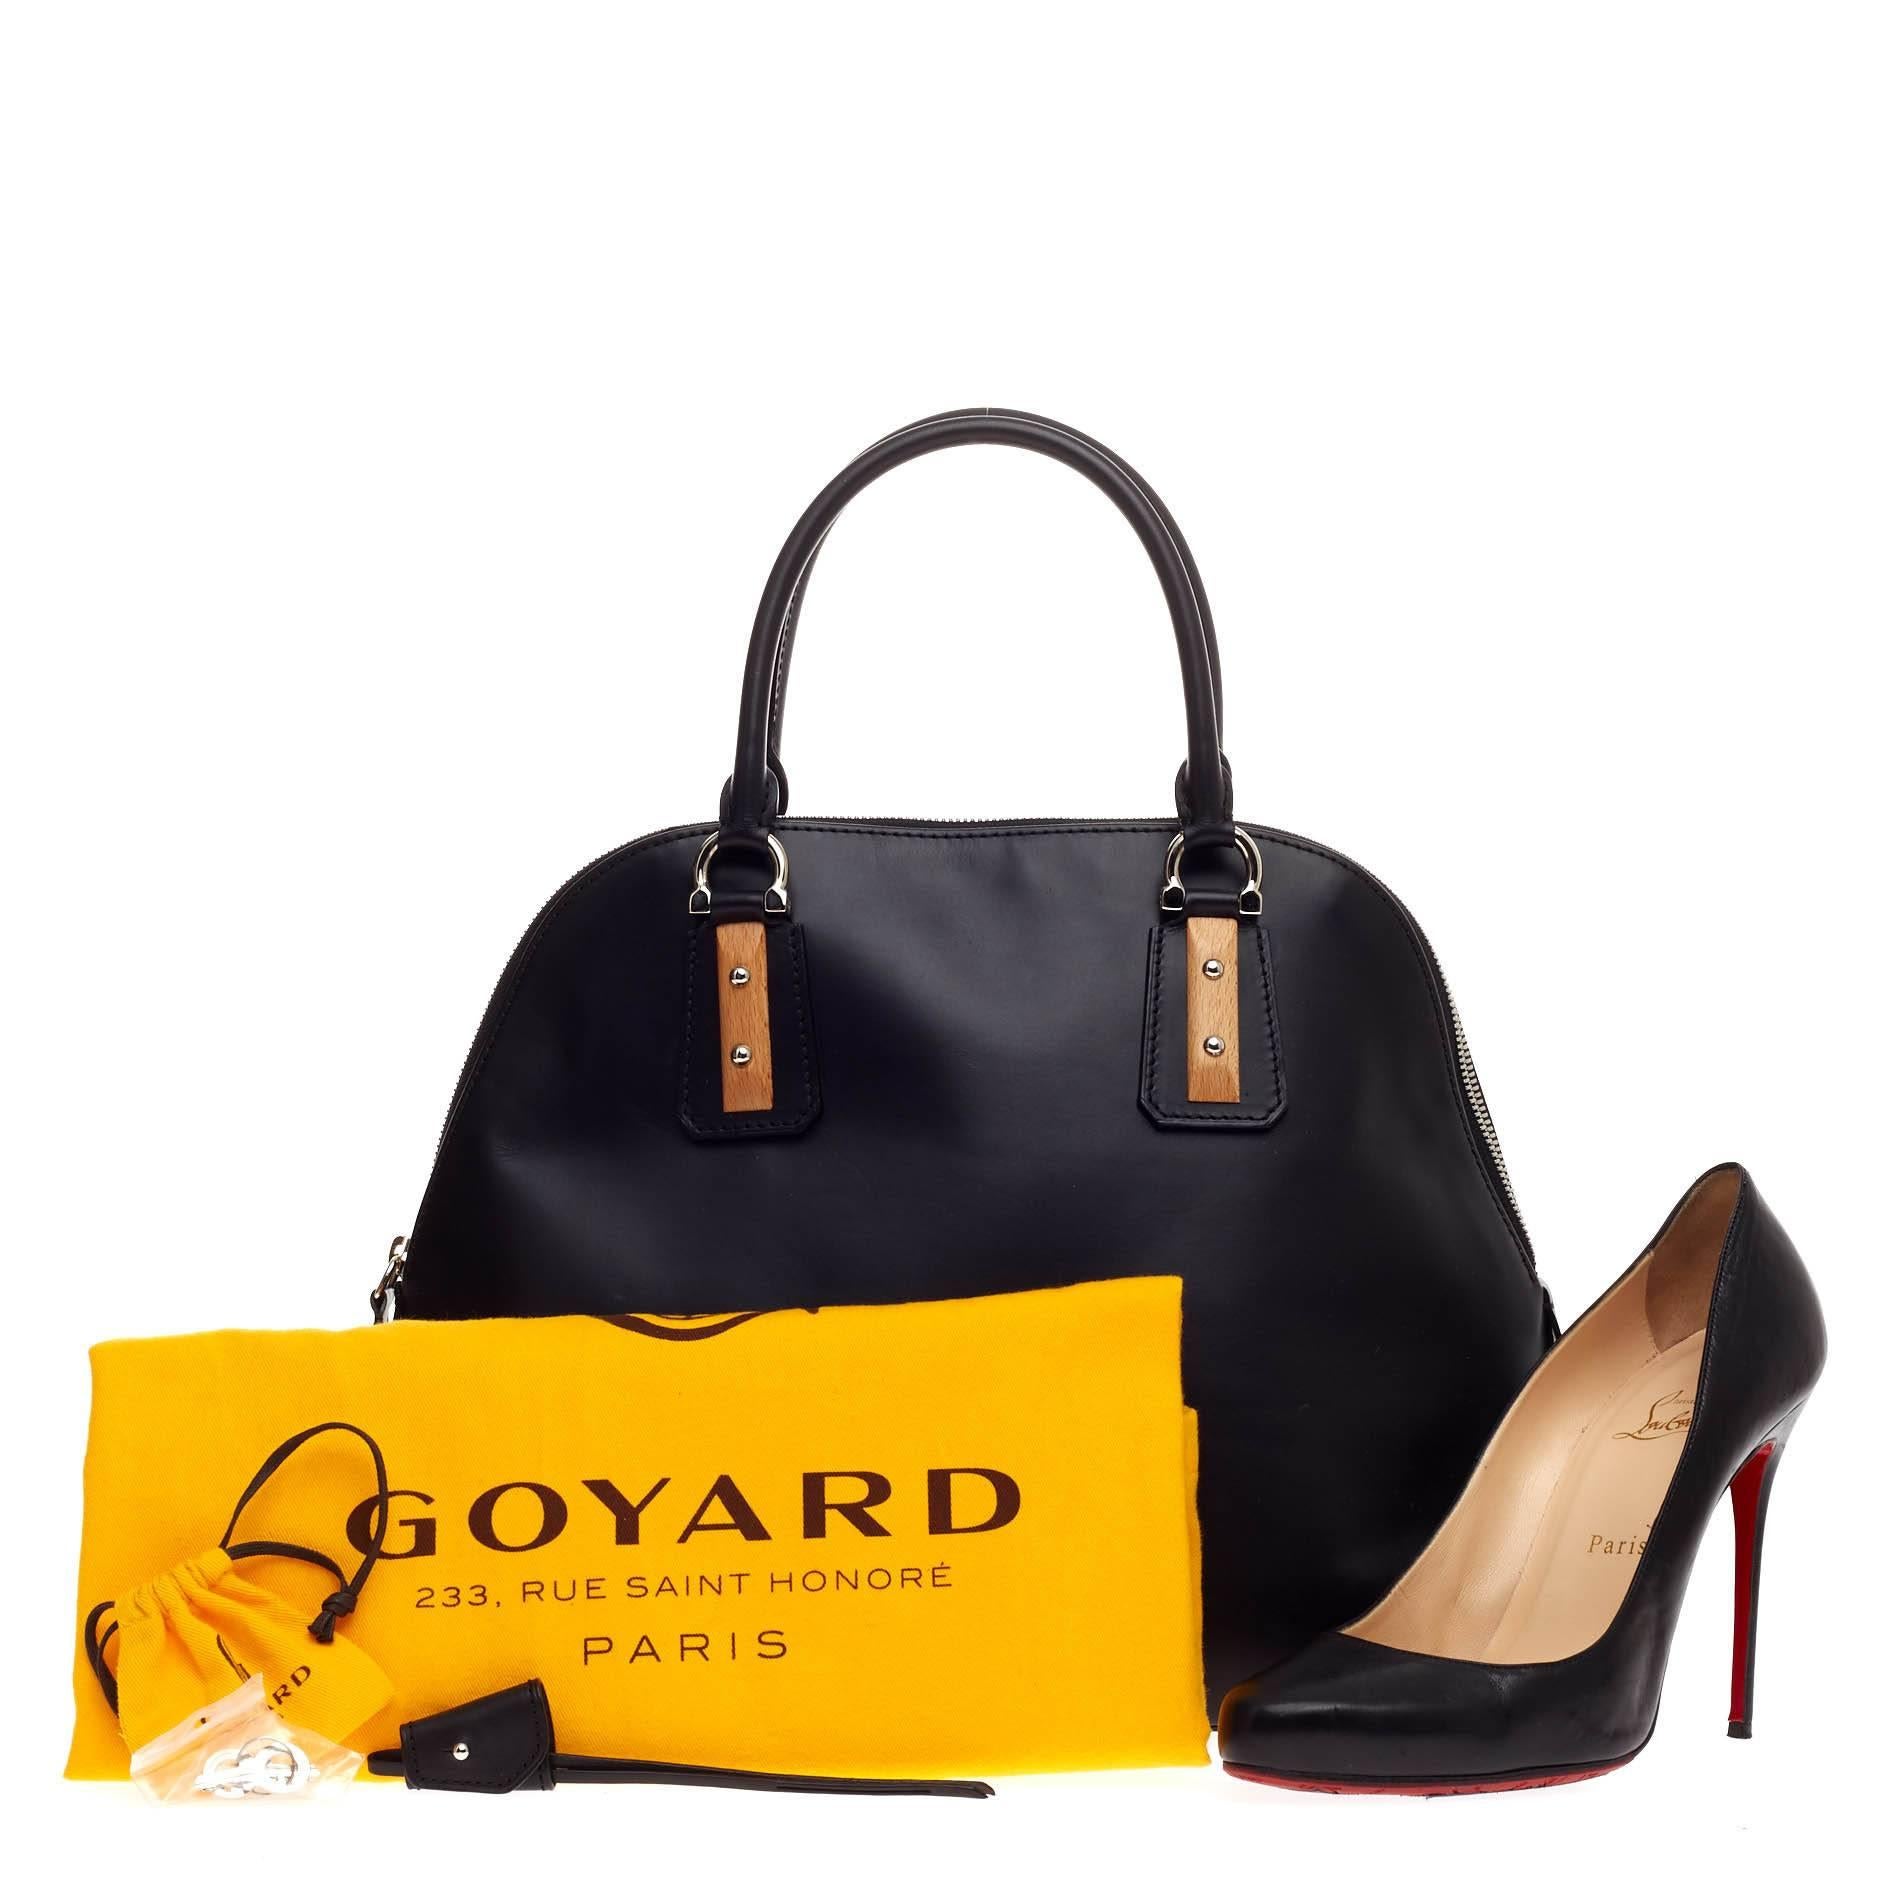 This authentic Goyard Sac Vendome Leather PM released in a limited edition 2010 Collection borrows its name from the famous Parisian square depiciting a classic, elegant style. Crafted from supple black leather with iconic print canvas detailing,